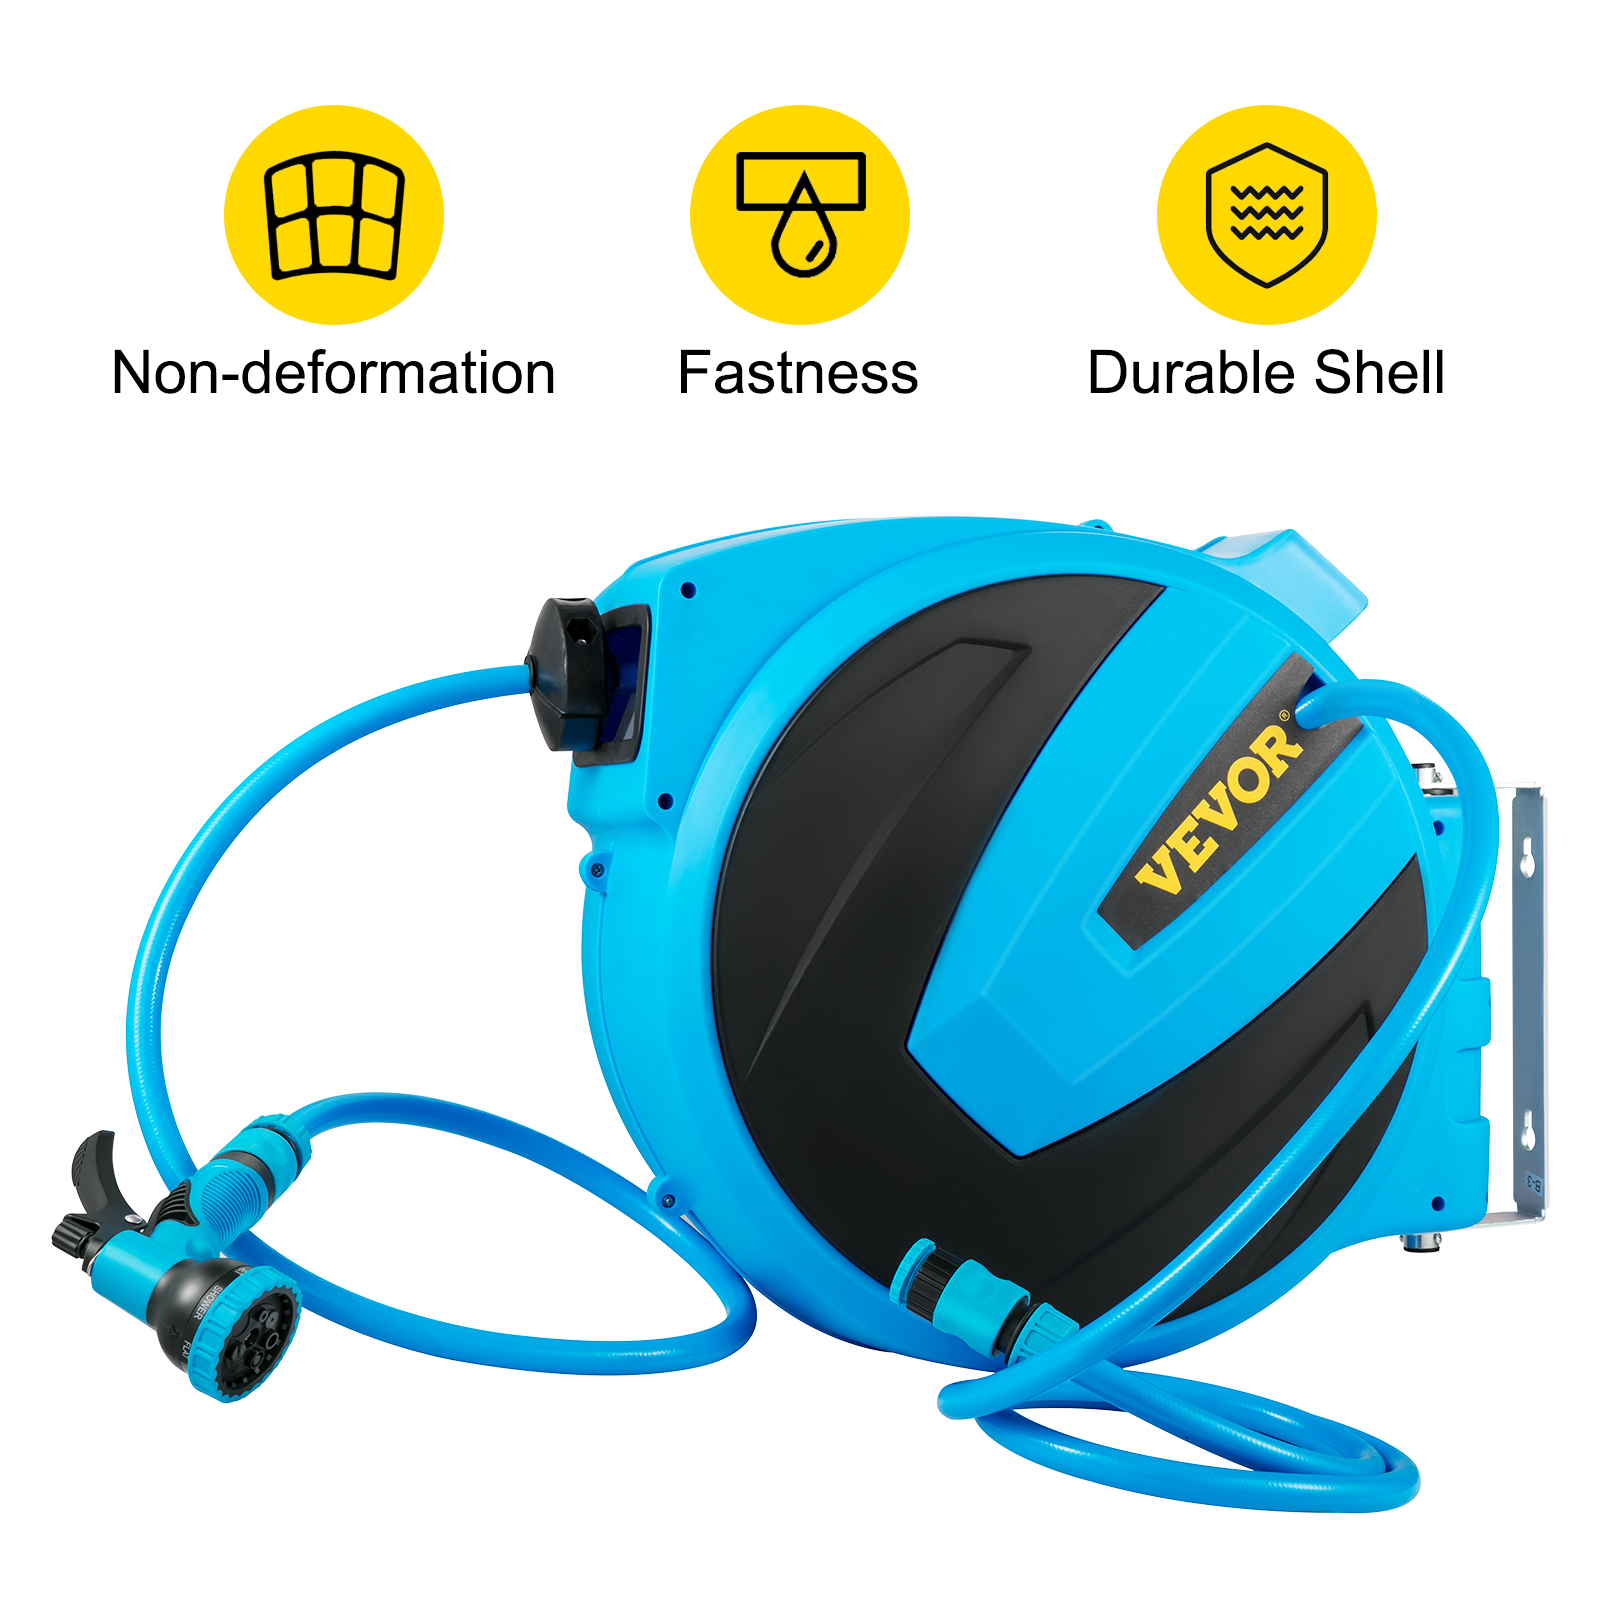 VEVOR Retractable Hose Reel, 5/8 inch x 65 ft, Any Length Lock & Automatic  Rewind Water Hose, Wall Mounted Garden Hose Reel w/ 180° Swivel Bracket and  7 Pattern Hose Nozzle, Blue